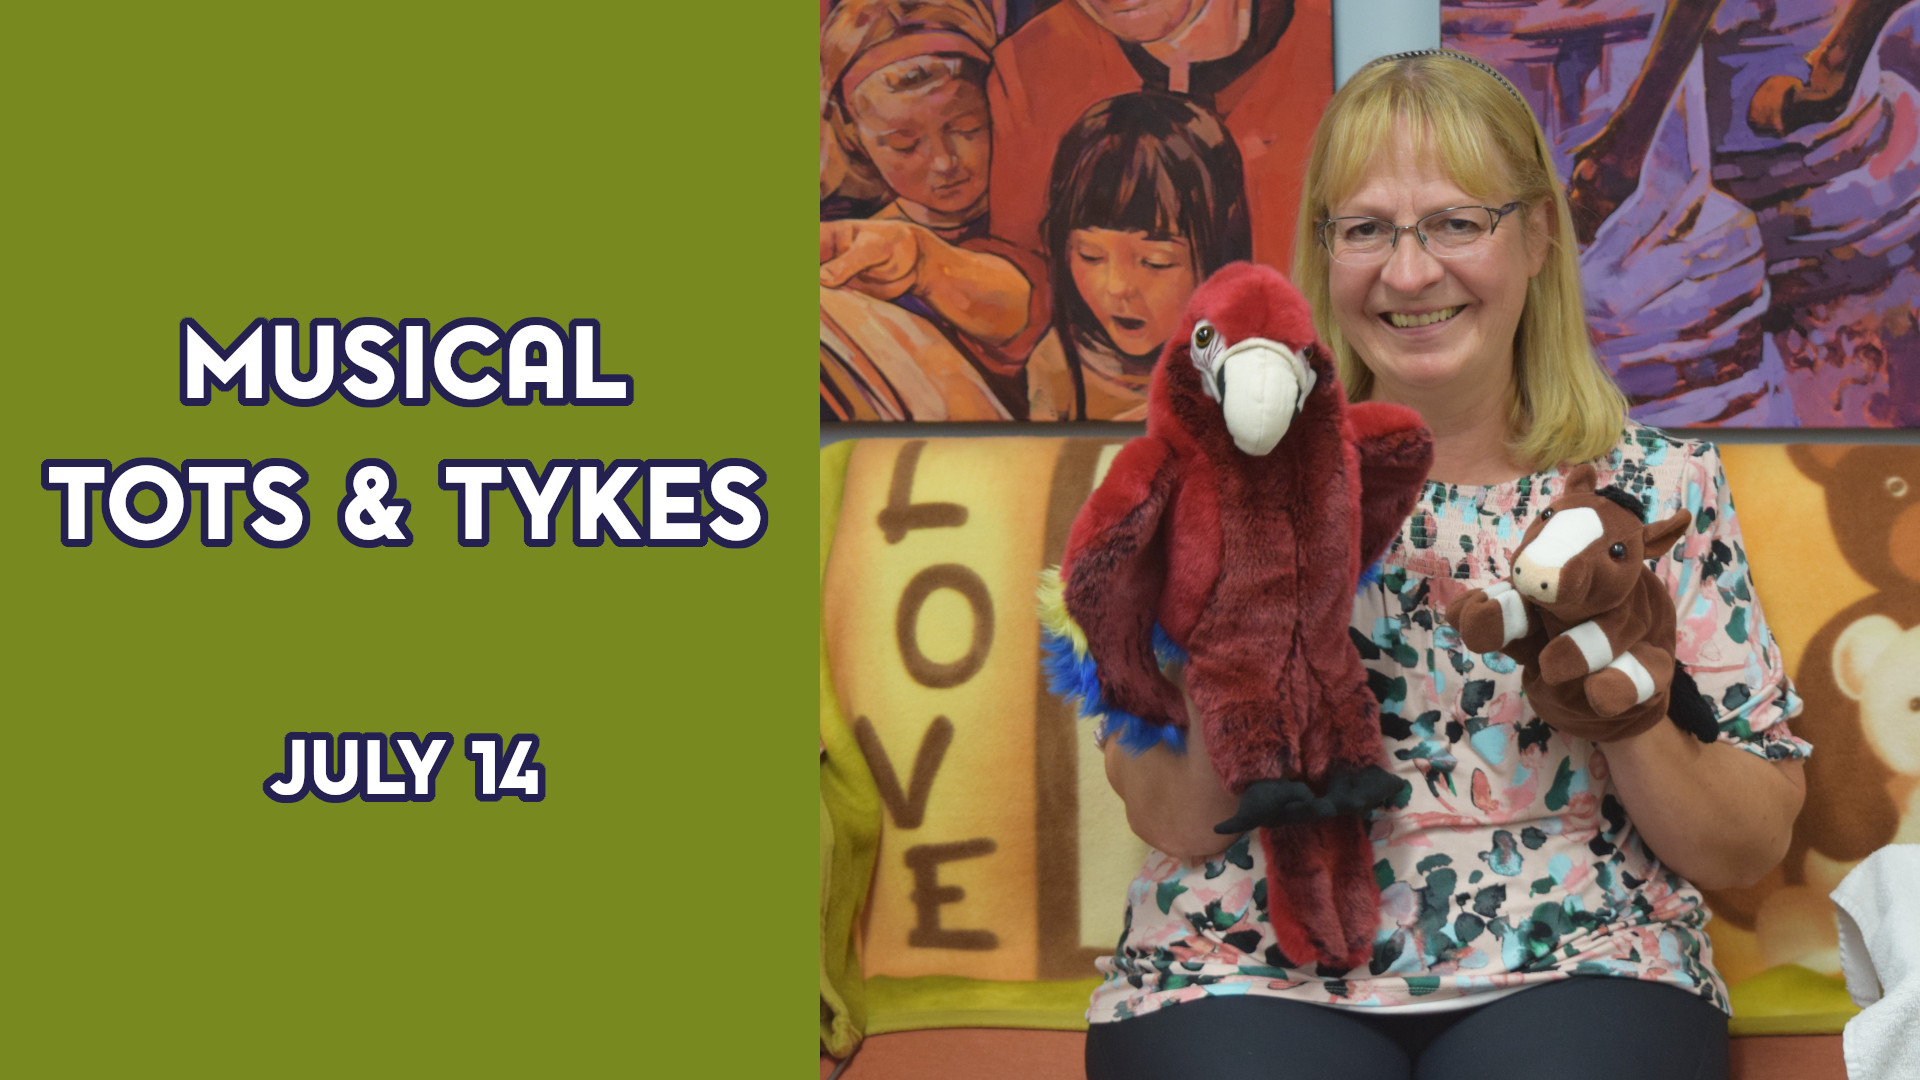 A woman holds puppets next to the text "Musical Tots & Tykes July 14"